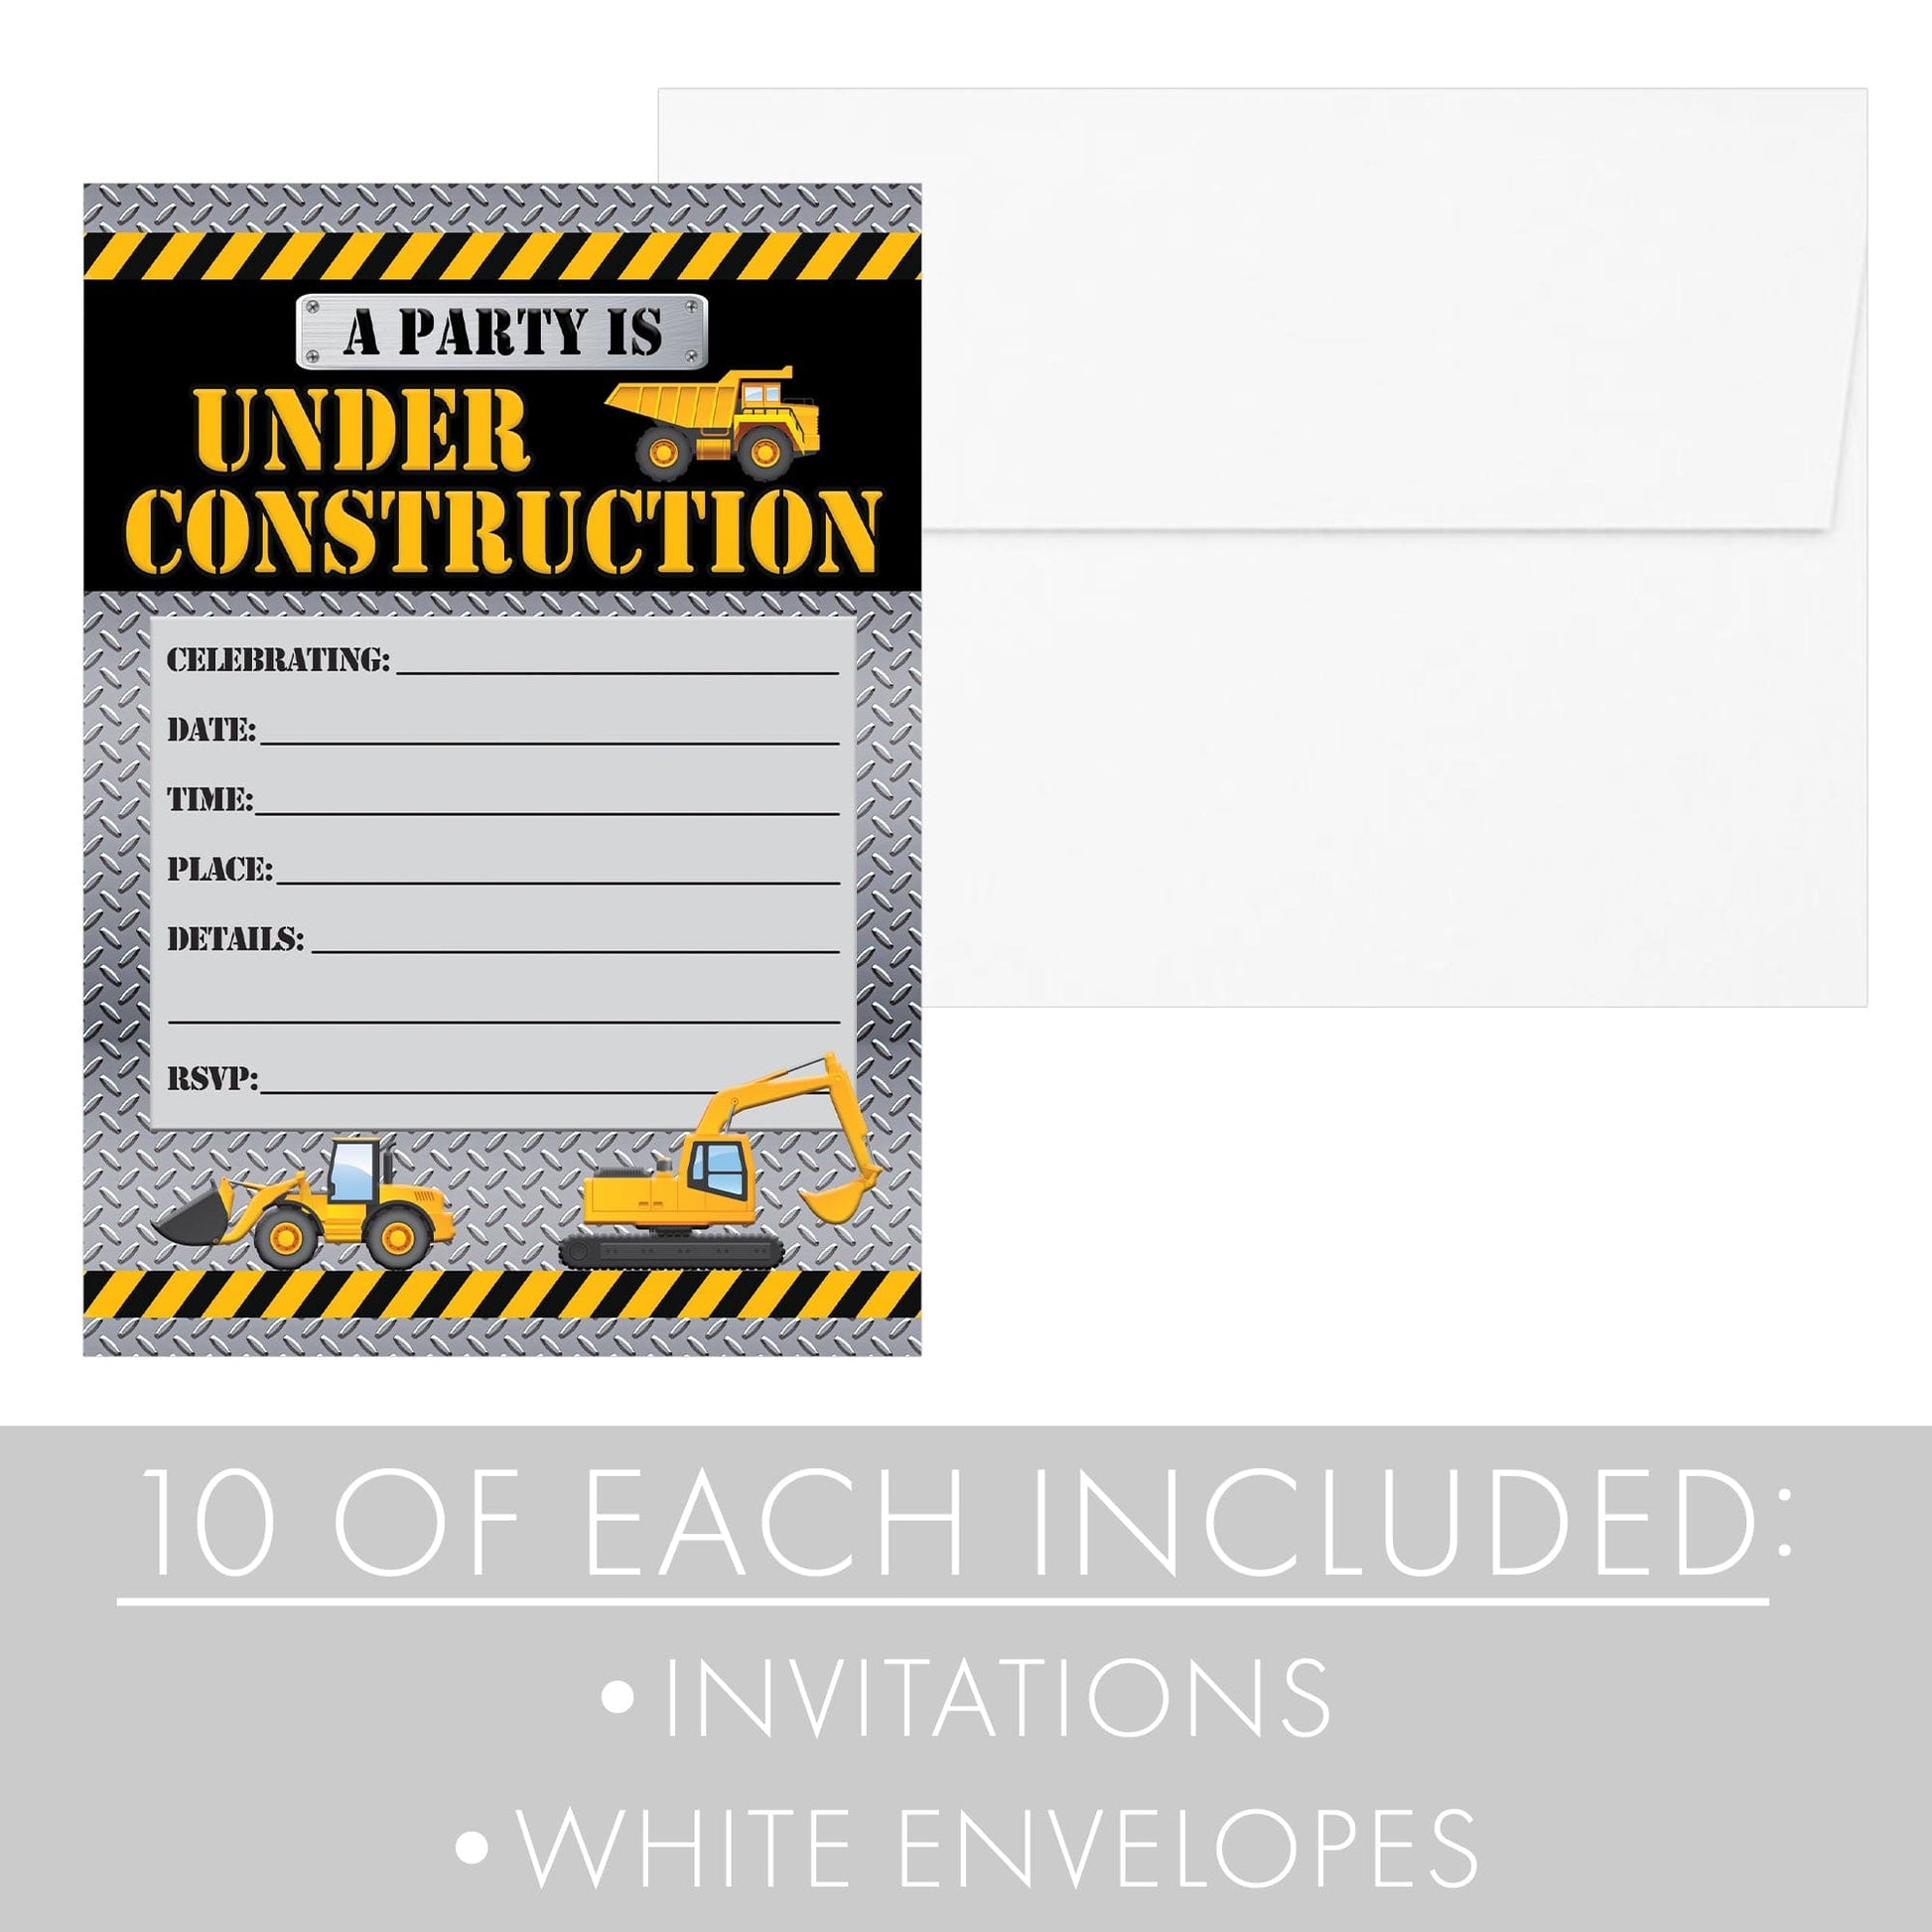 Under Construction Birthday Party Invitations - 10 Cards